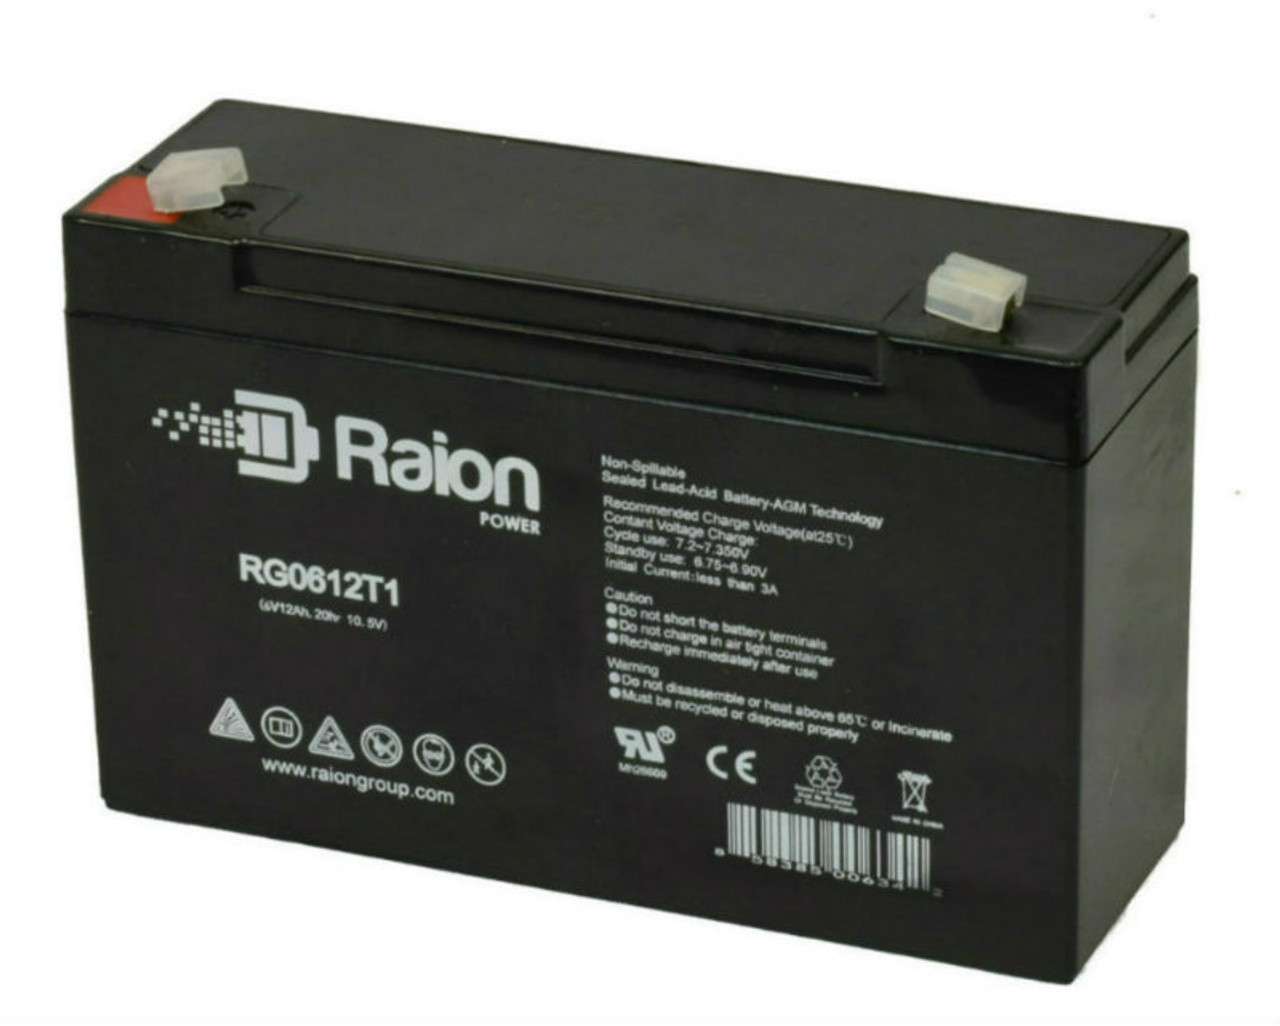 Raion Power RG06120T1 Replacement Battery for Teledyne 2RQ6S16